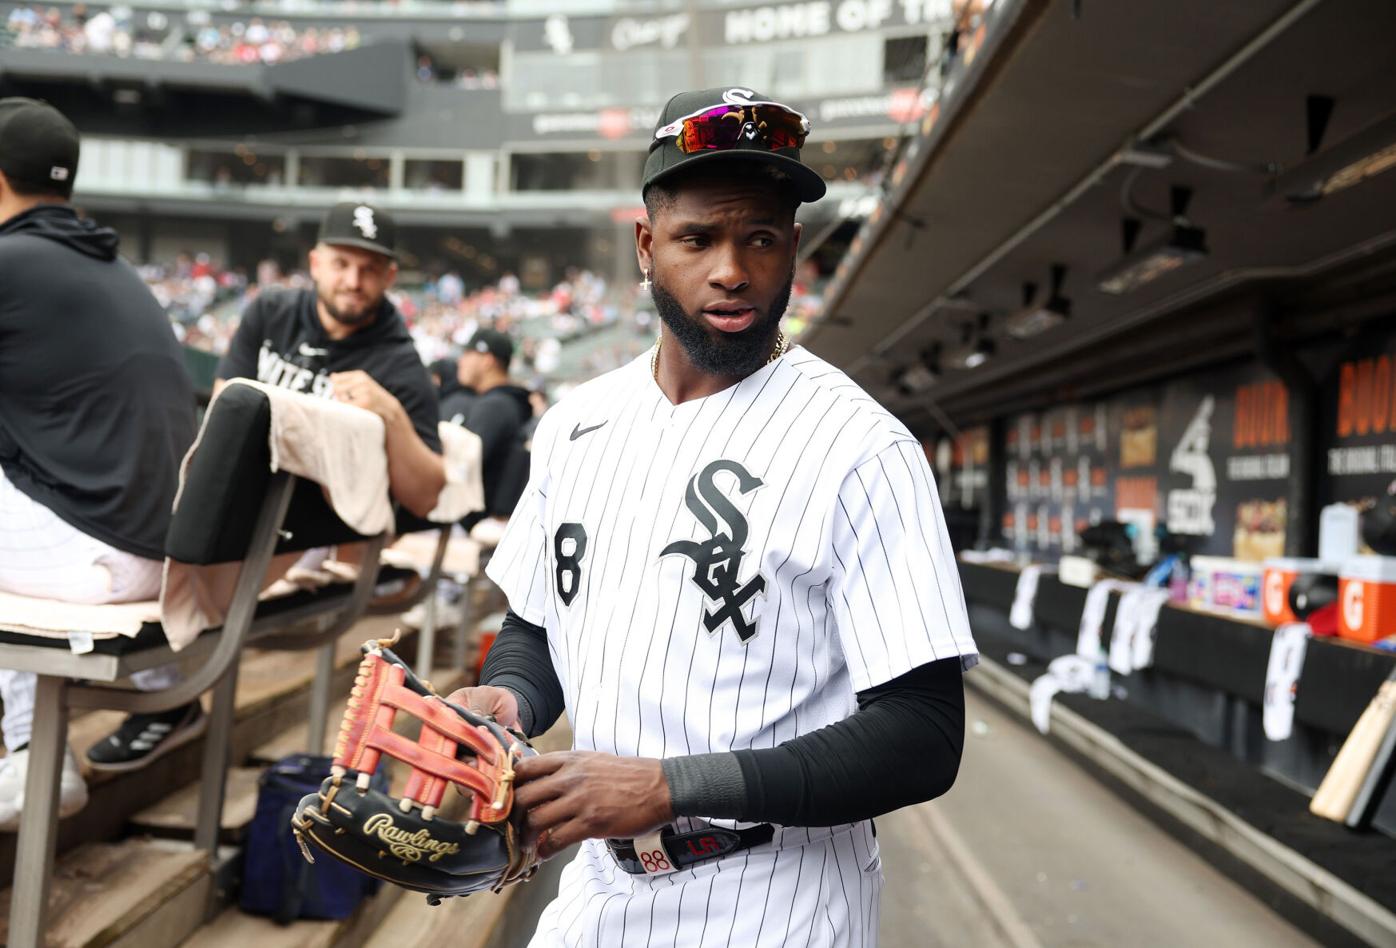 Redeveloping White Sox parking lots could be home run for Chicago